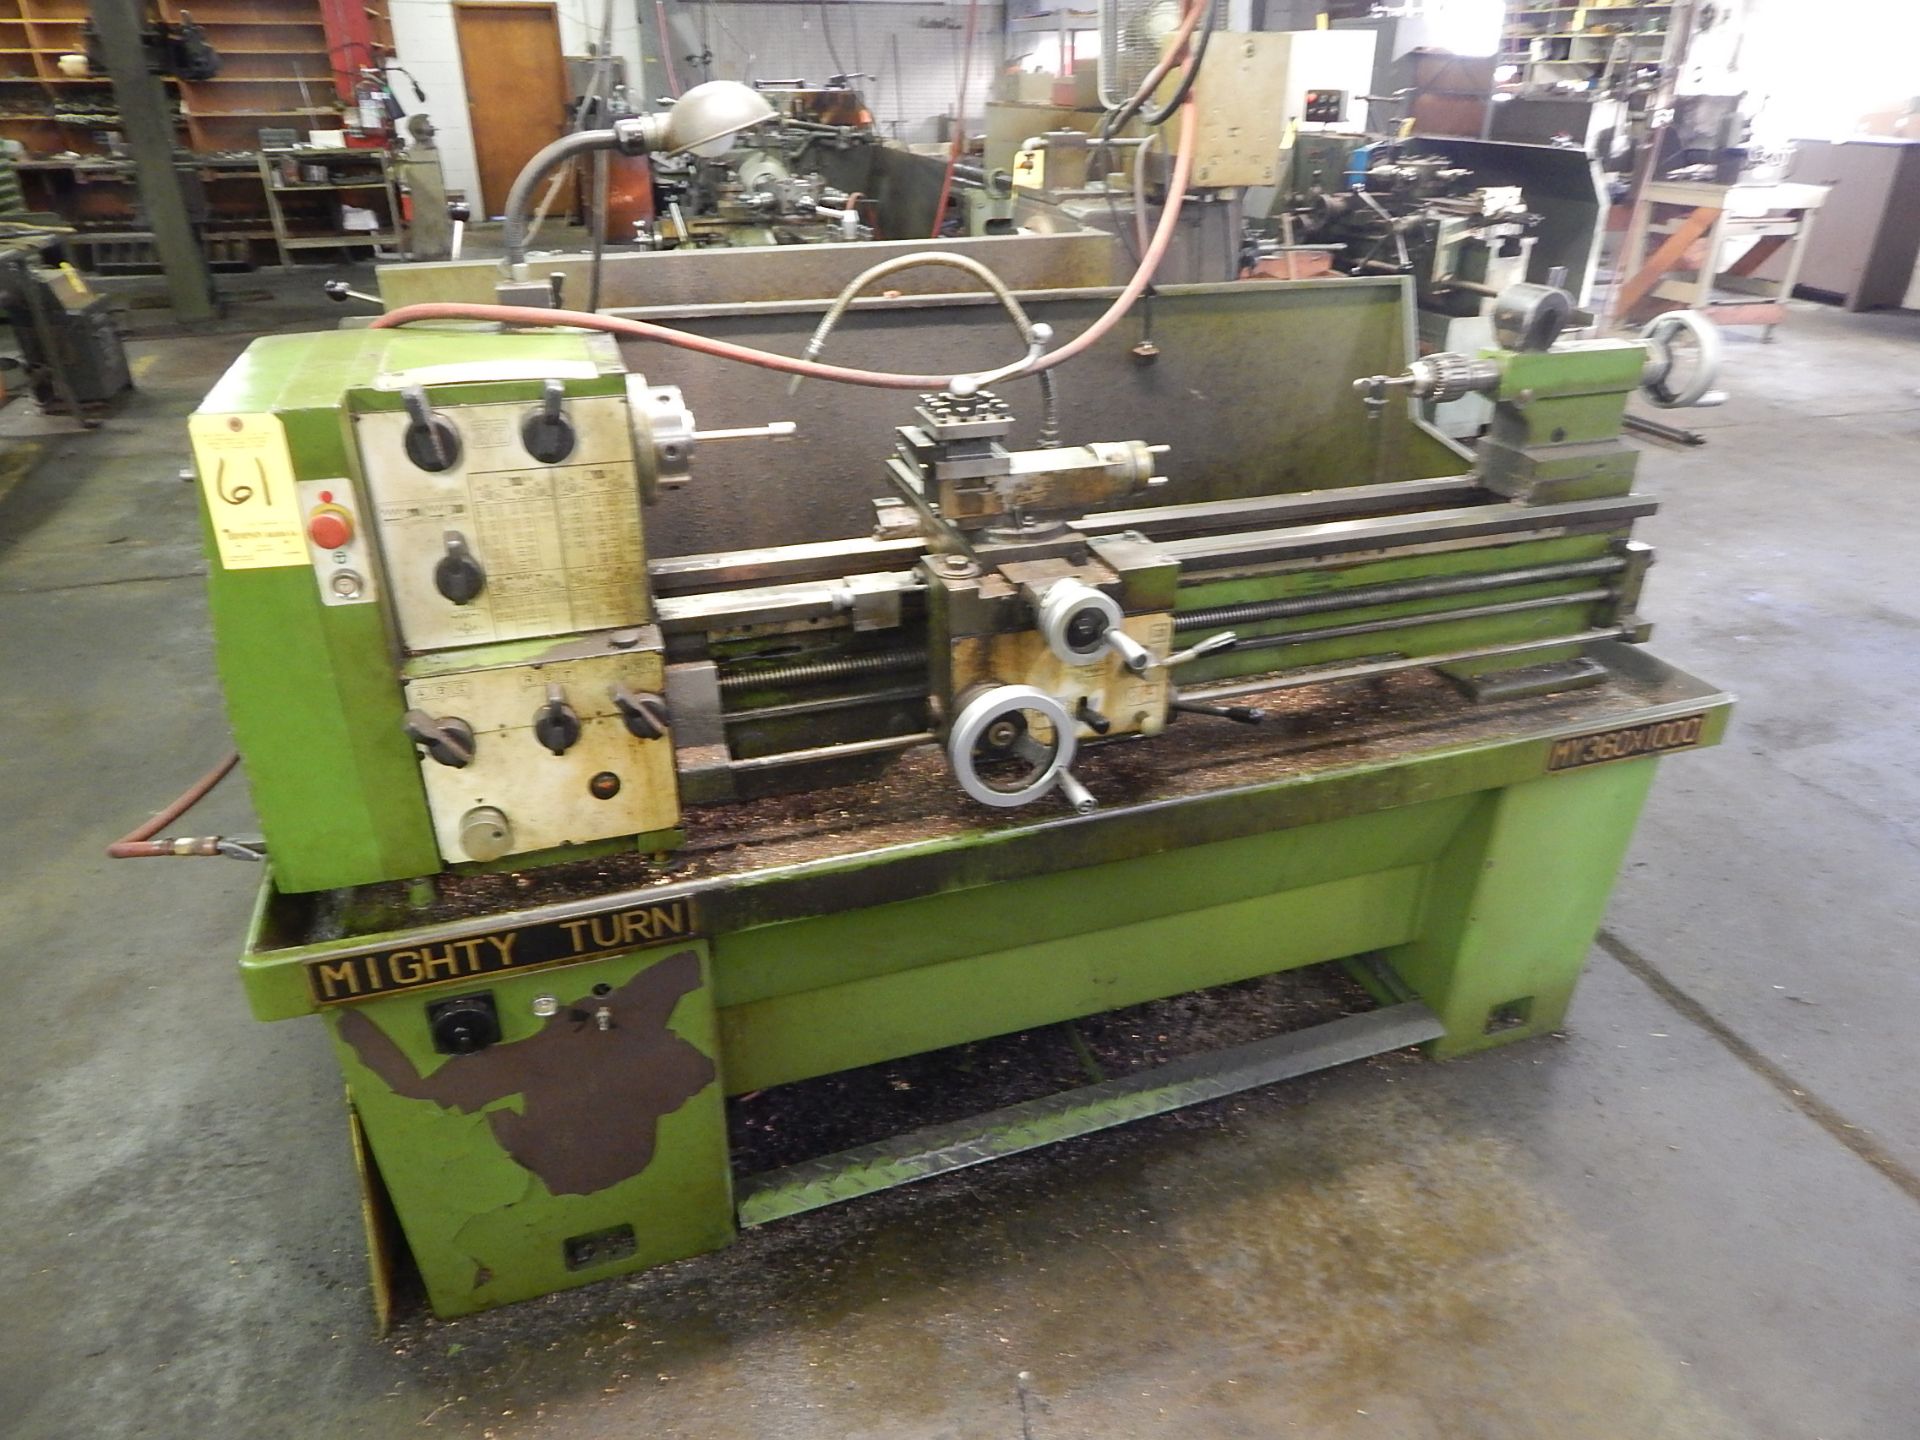 Mighty Turn MY 360 X 1000 Tool Room Lathe, 14" X 40", s/n 22066, 5C Collet Nose, Loading Fee $100.00 - Image 3 of 4